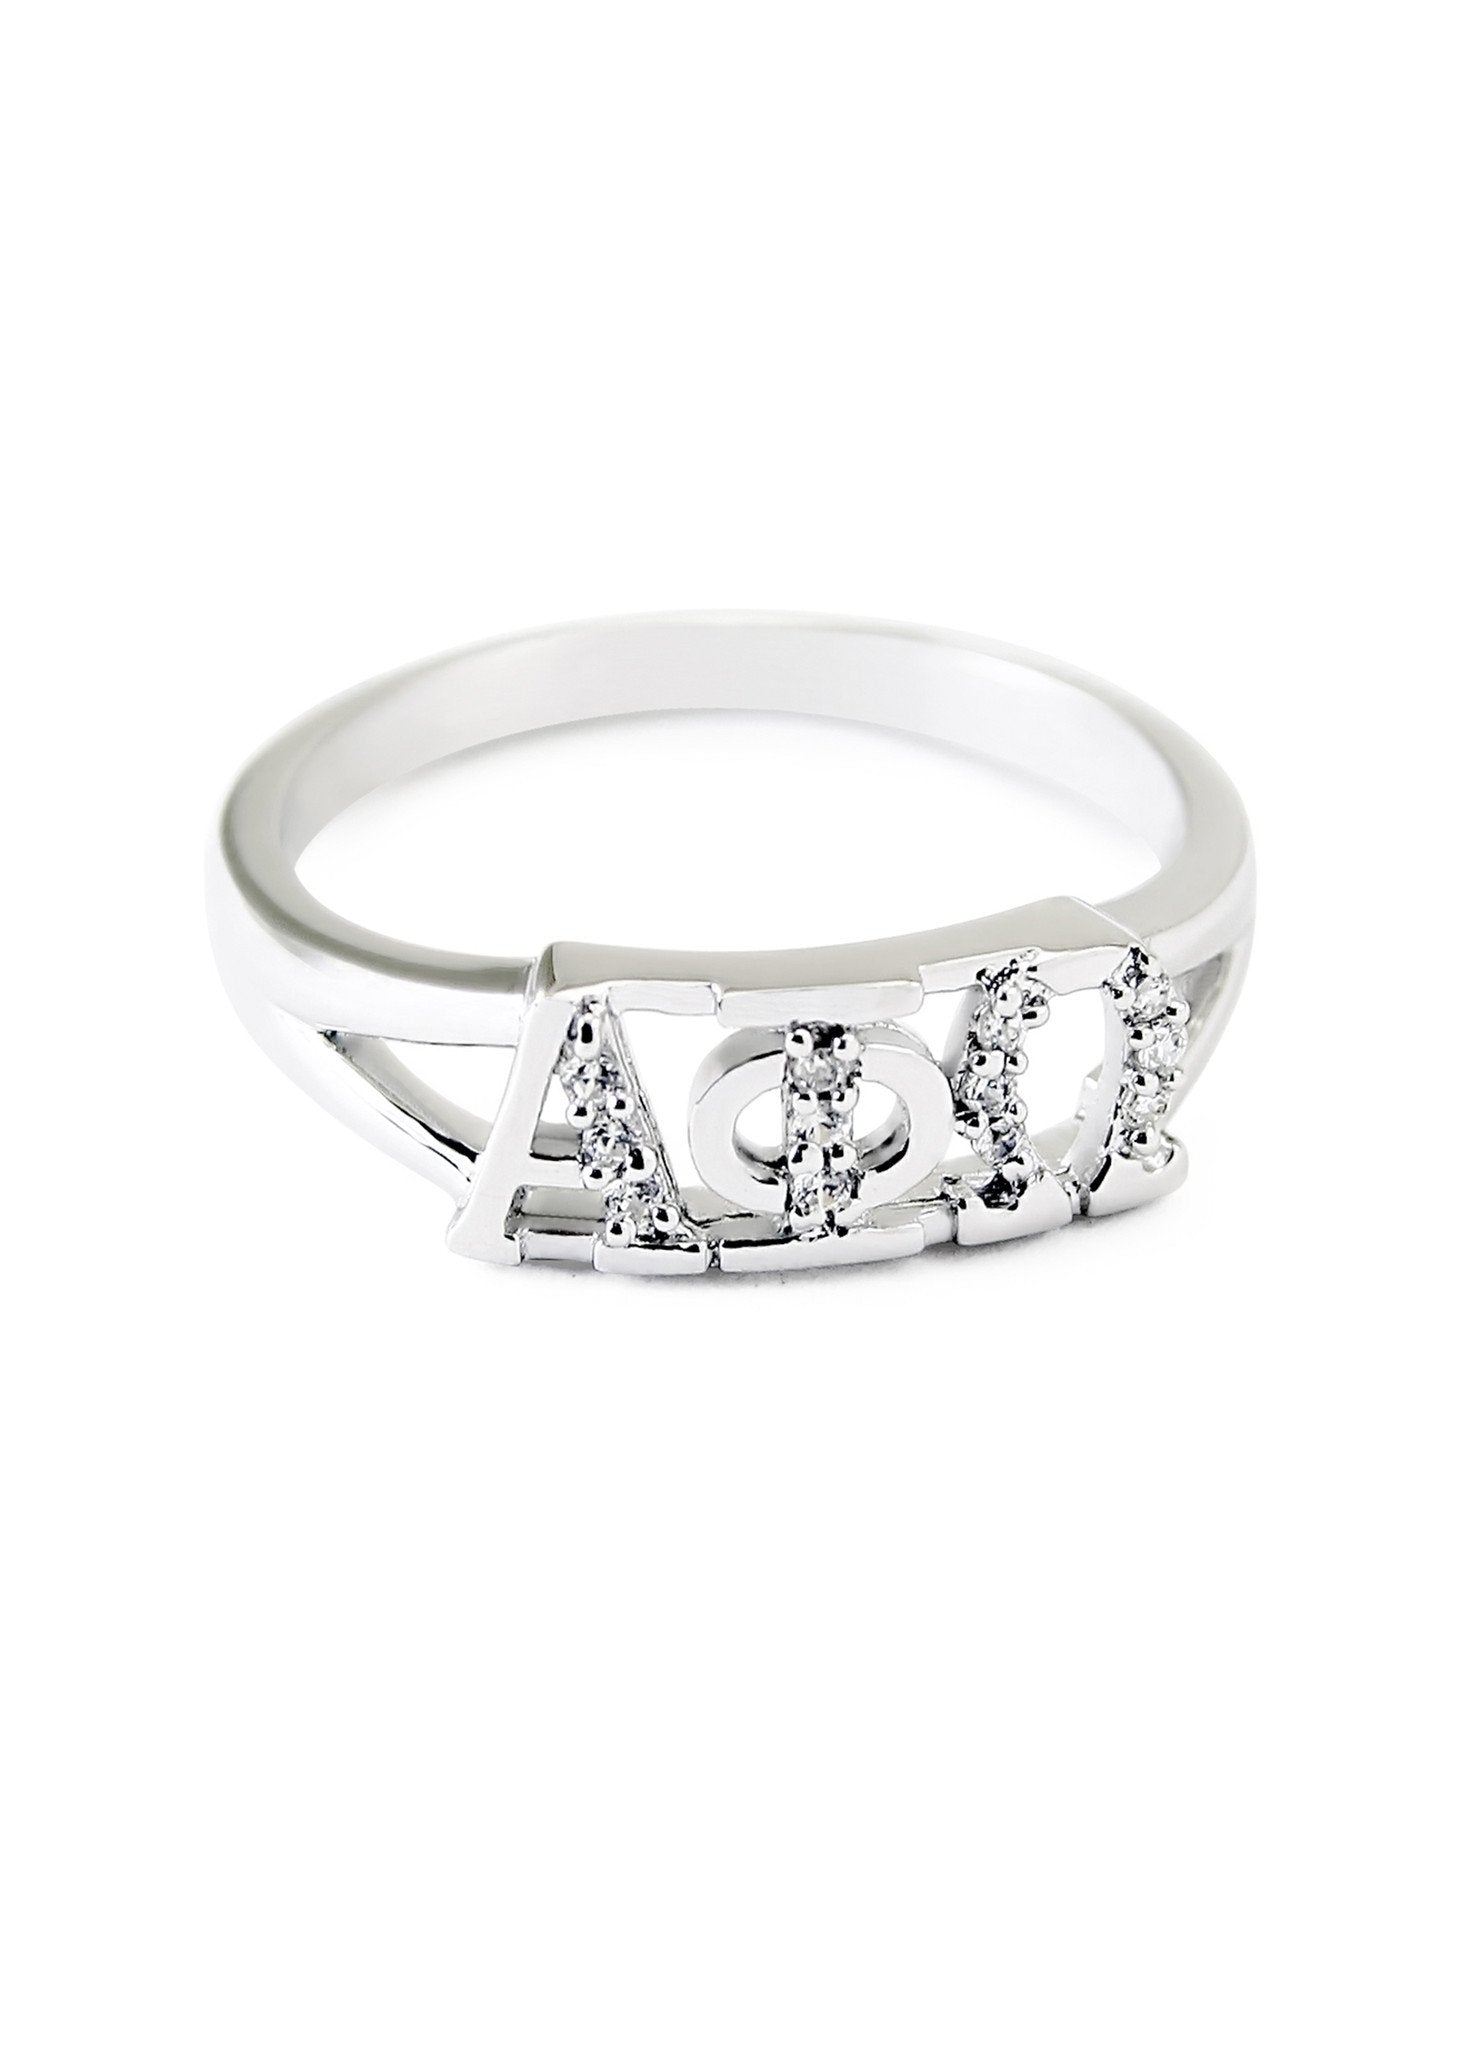 Buy Silver Name Ring Online In India - Etsy India